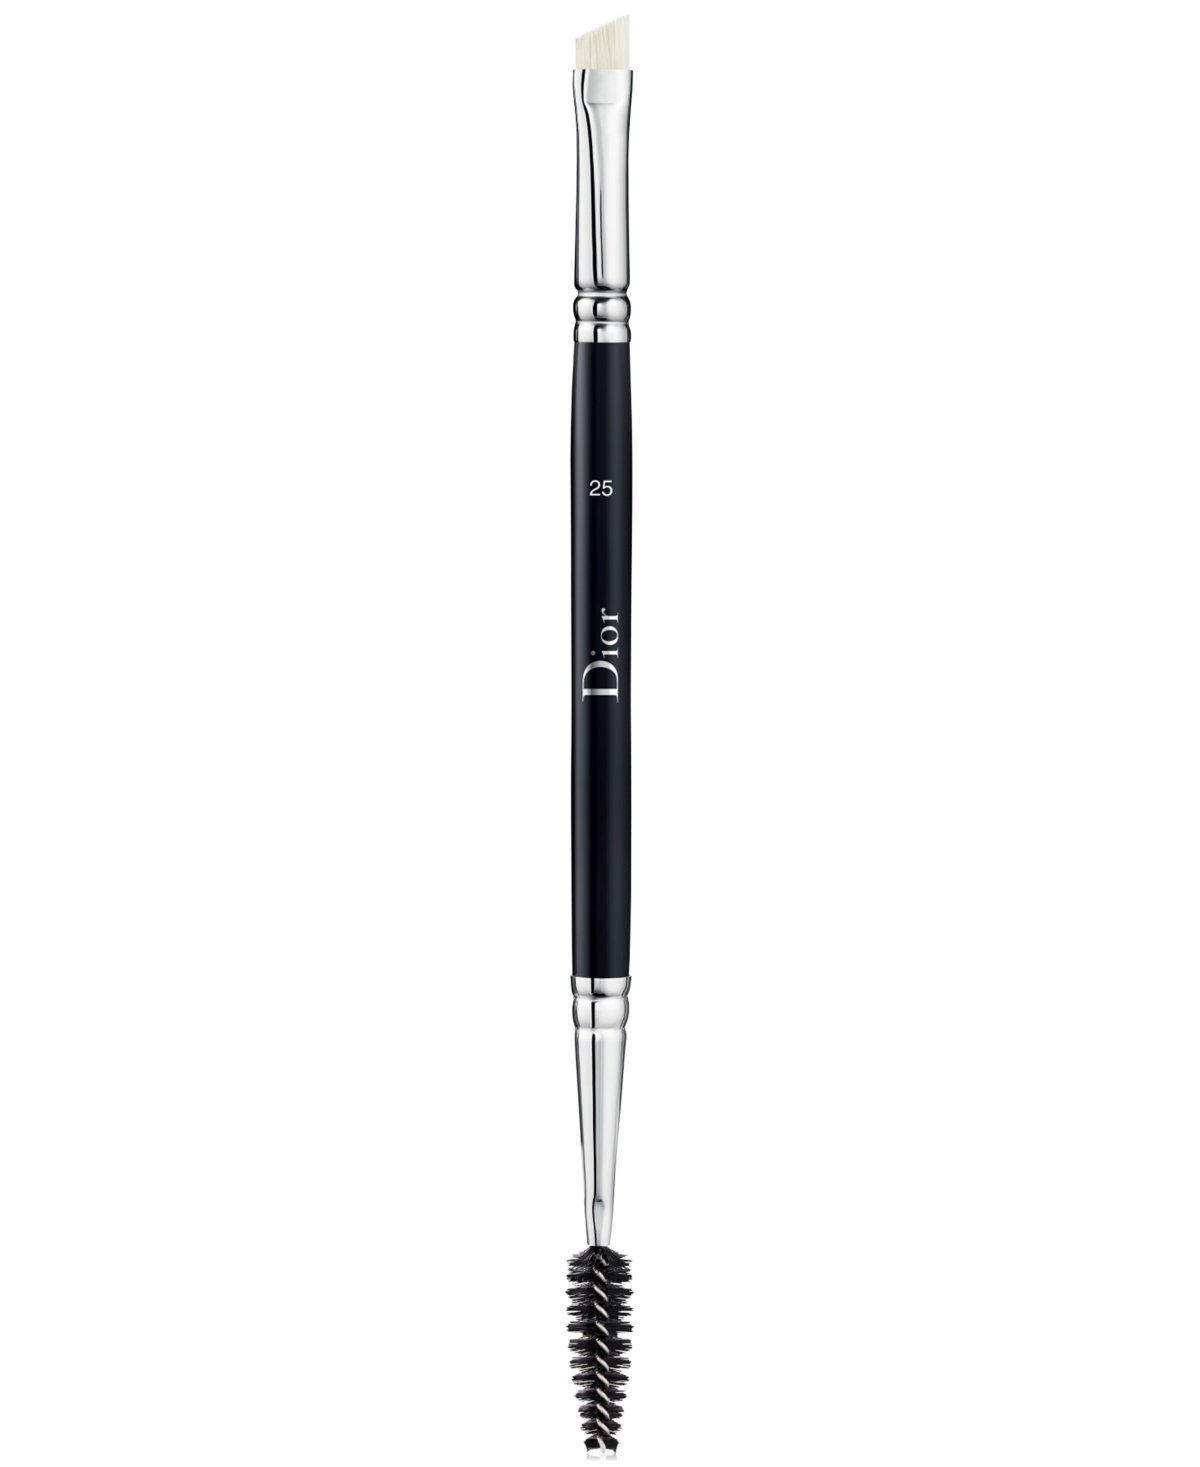 Dior Backstage Double-ended Brow Brush Nâ°25 In No Color